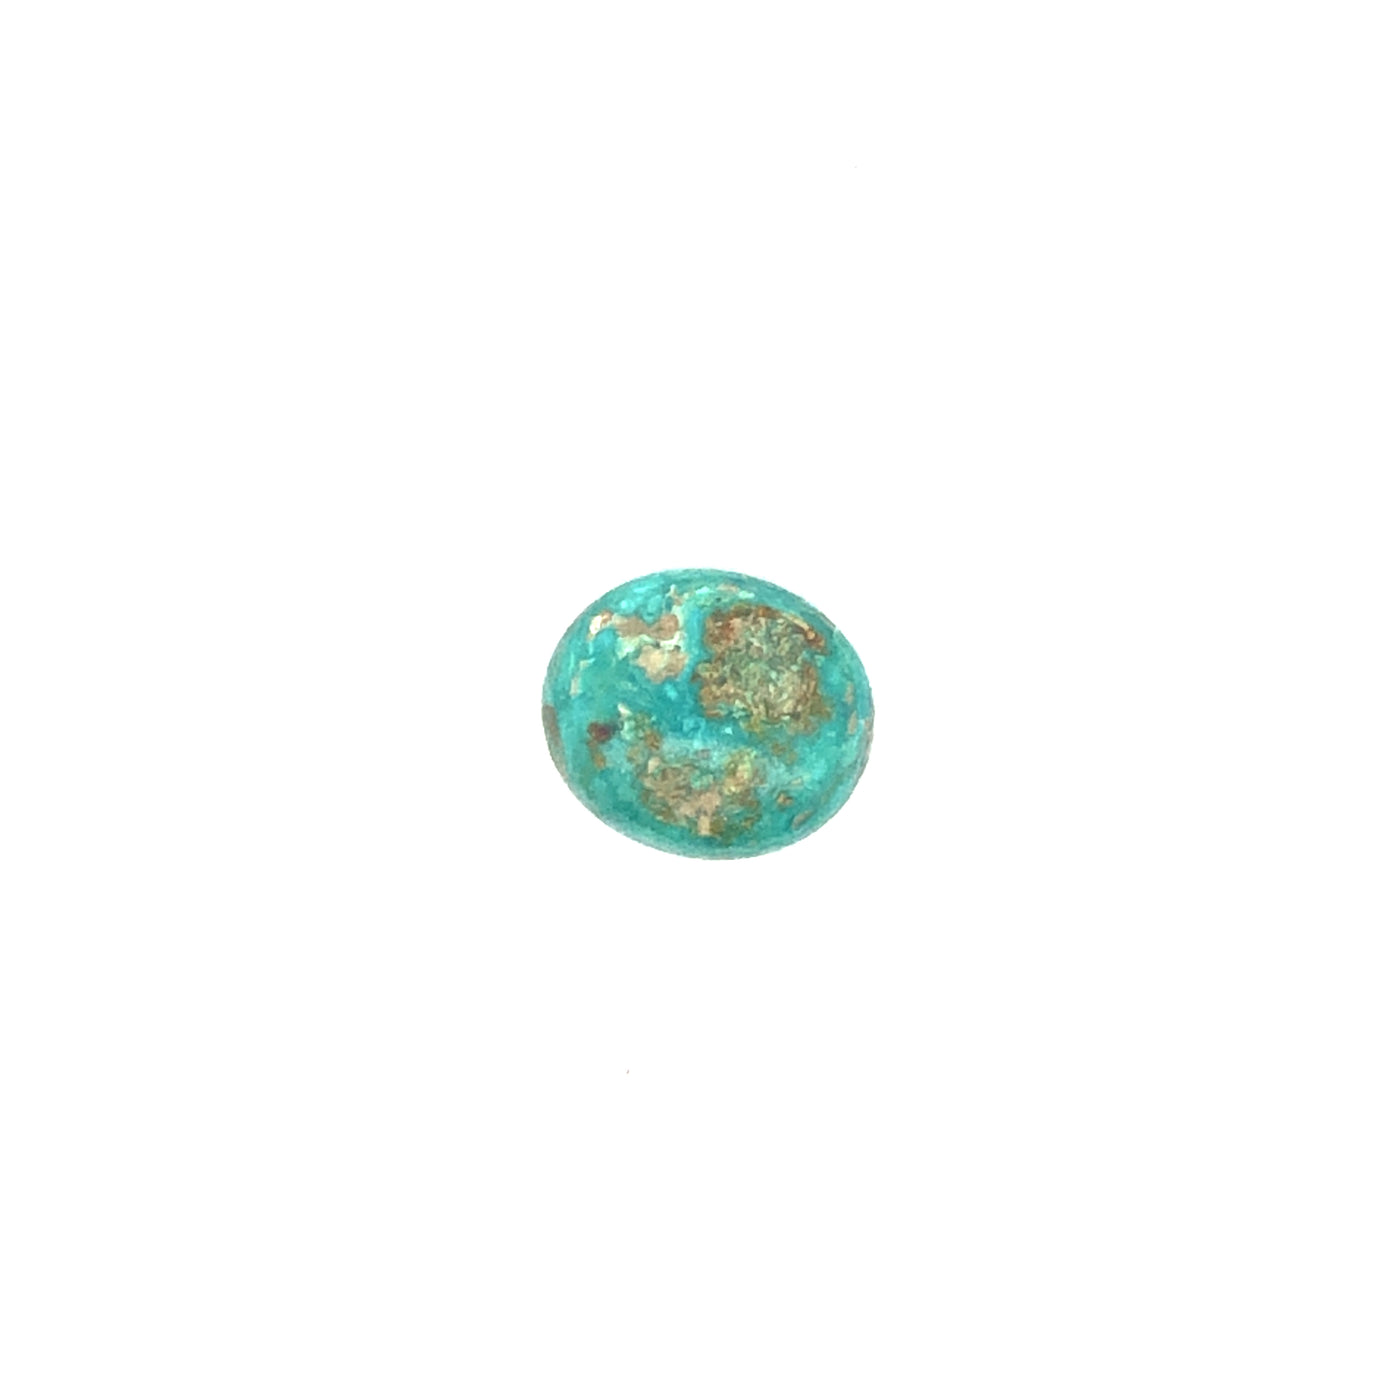 Loose Narooma Turquoise Oval Shaped 6.89Ct Dark Blue With Some White